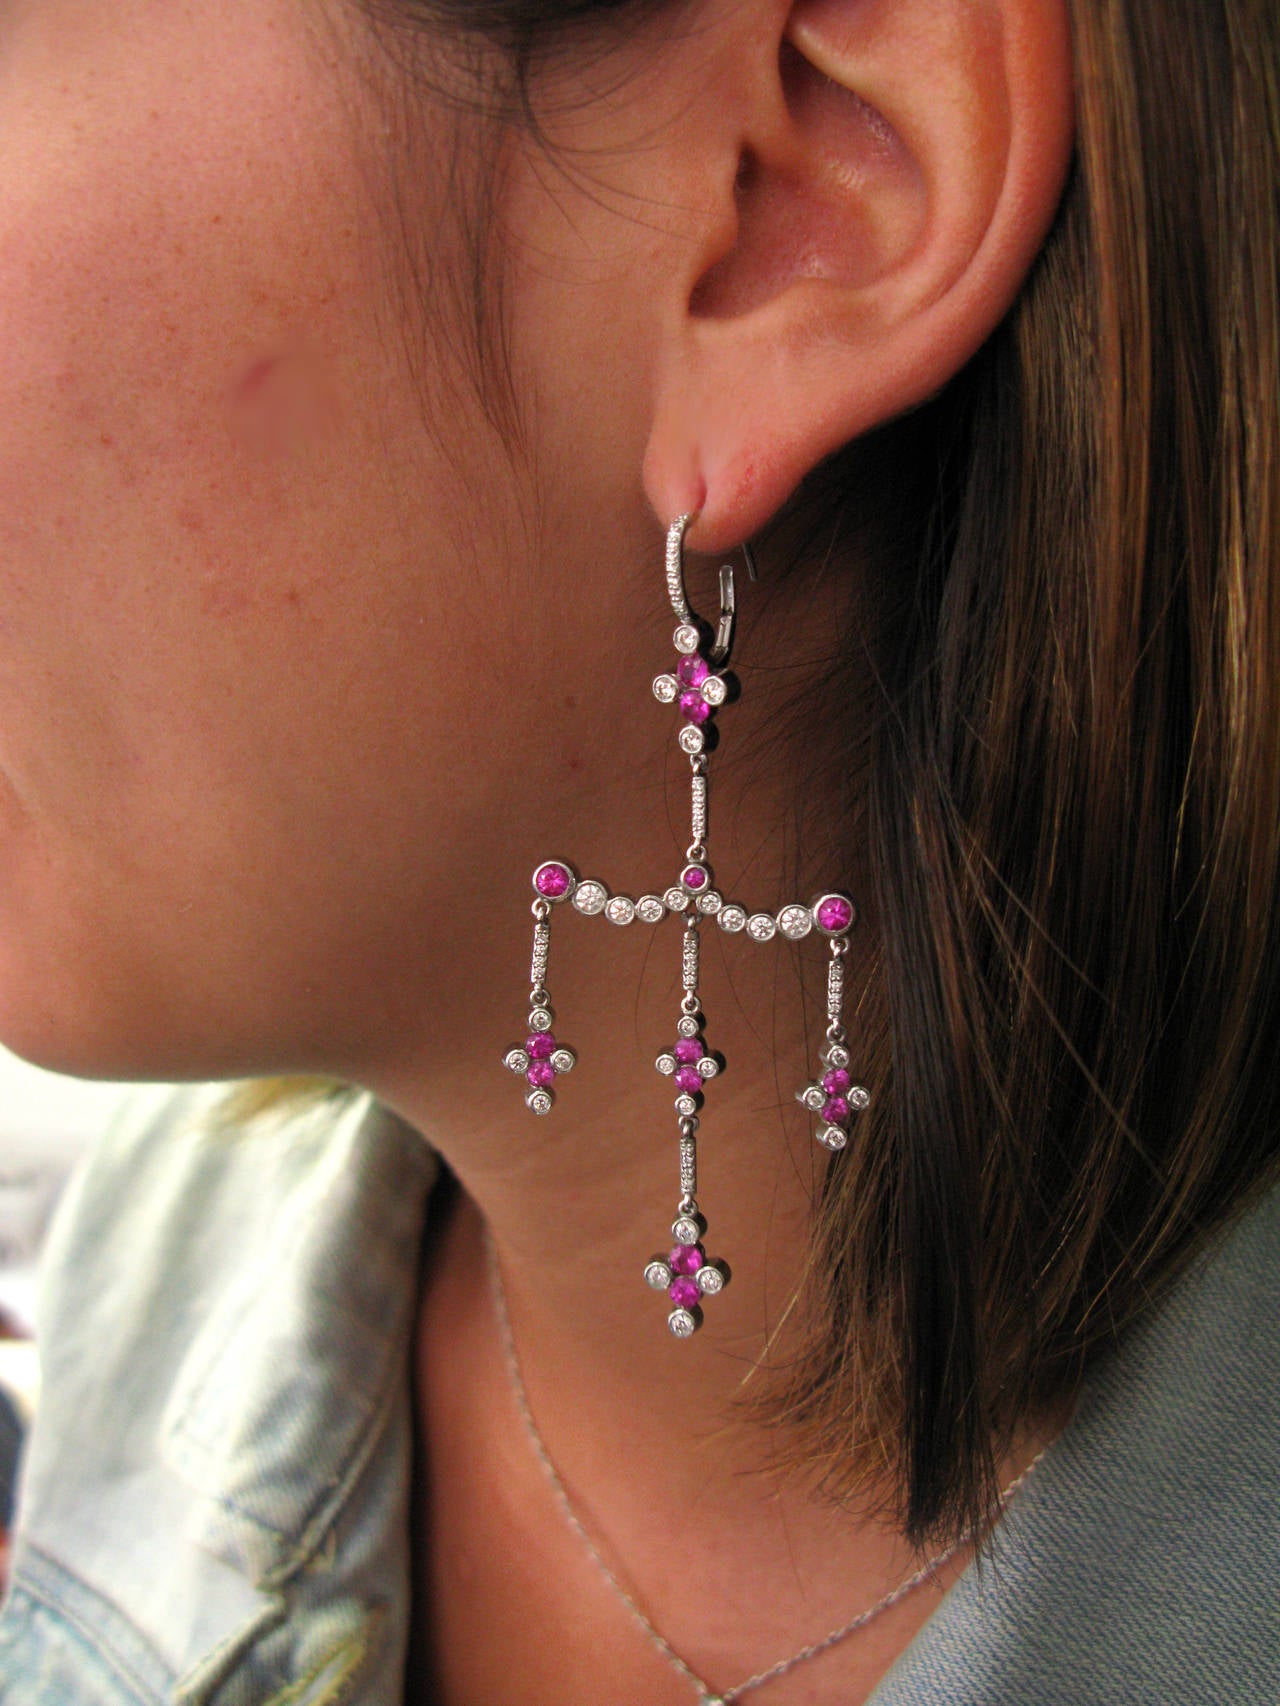 These one-of-a-kind spectacular platinum leverback chandelier earrings contain 2.60ctw of round rubies and 1.48ctw of bezel set round brilliant diamonds. Truly as unique as the lucky woman who gets to wear them!